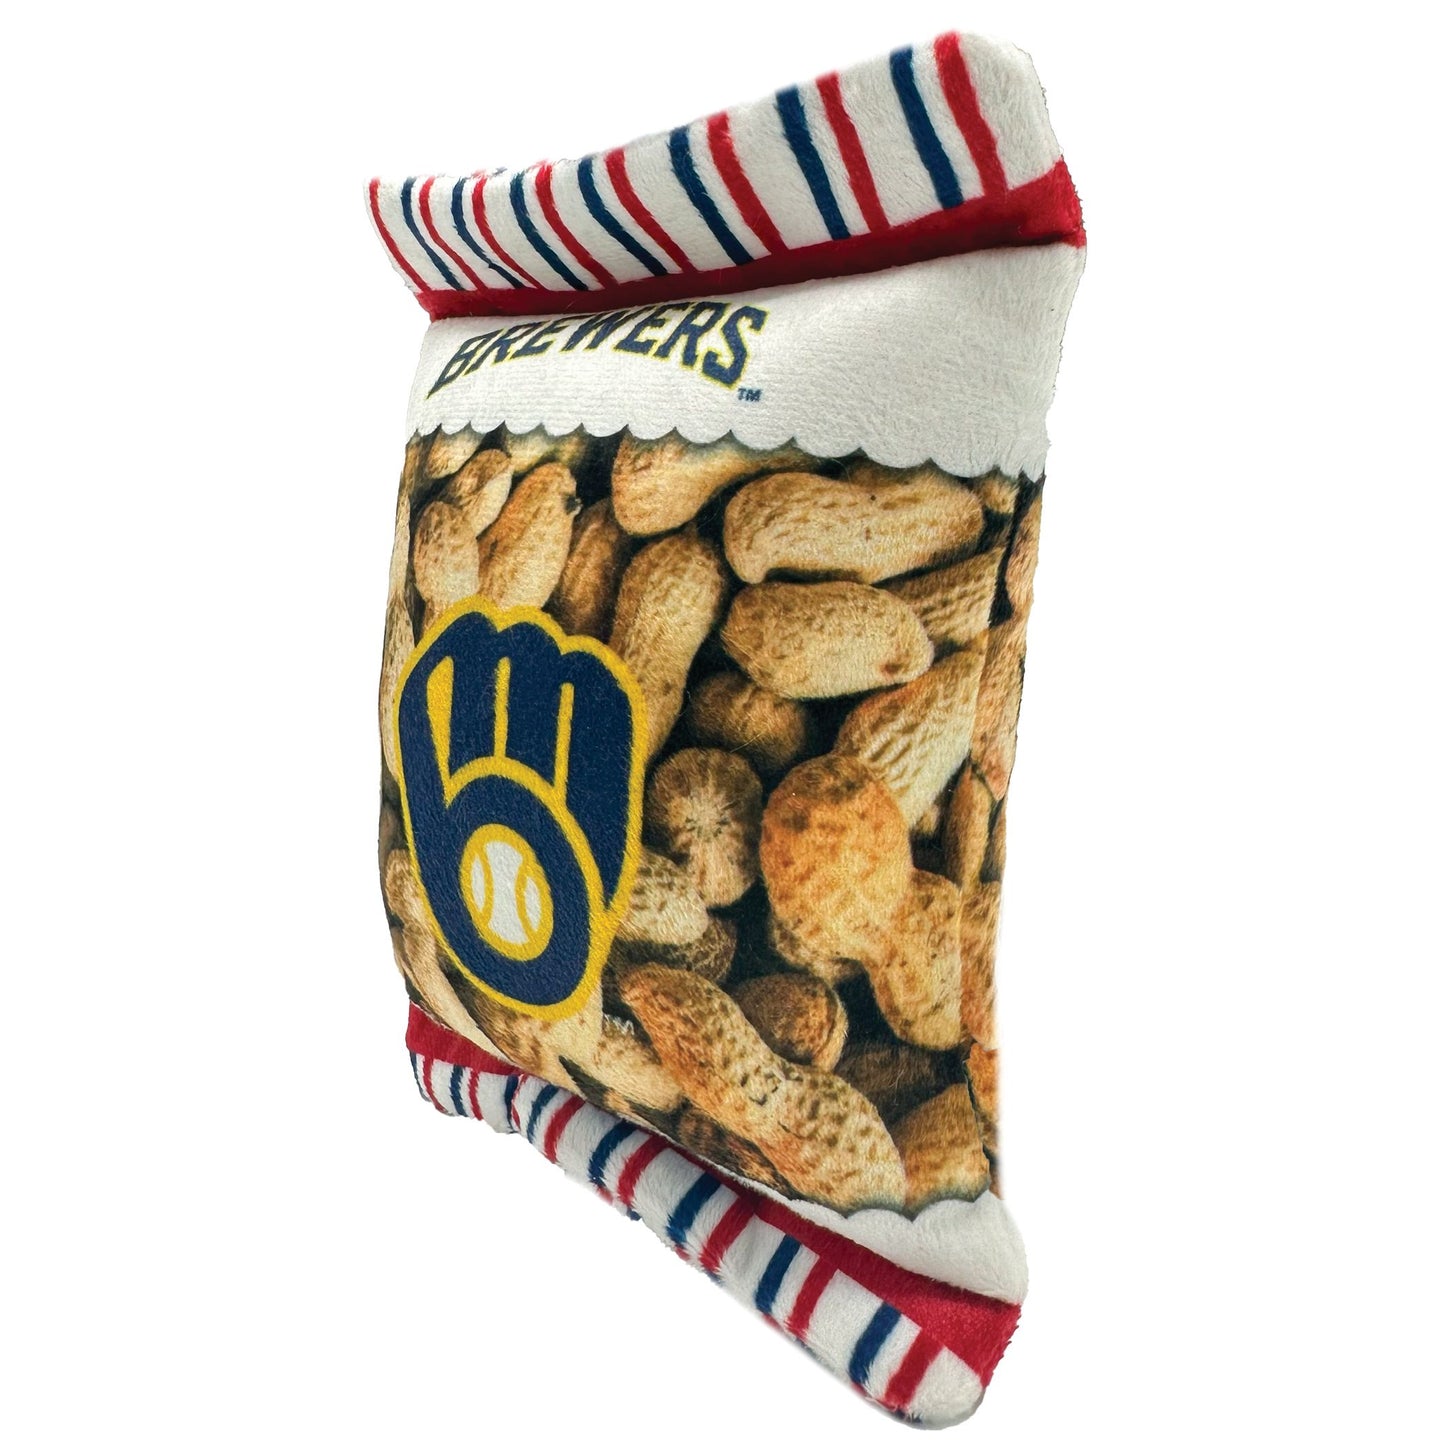 Brewers Peanut Bag Toy - Trendy Dog Boutique